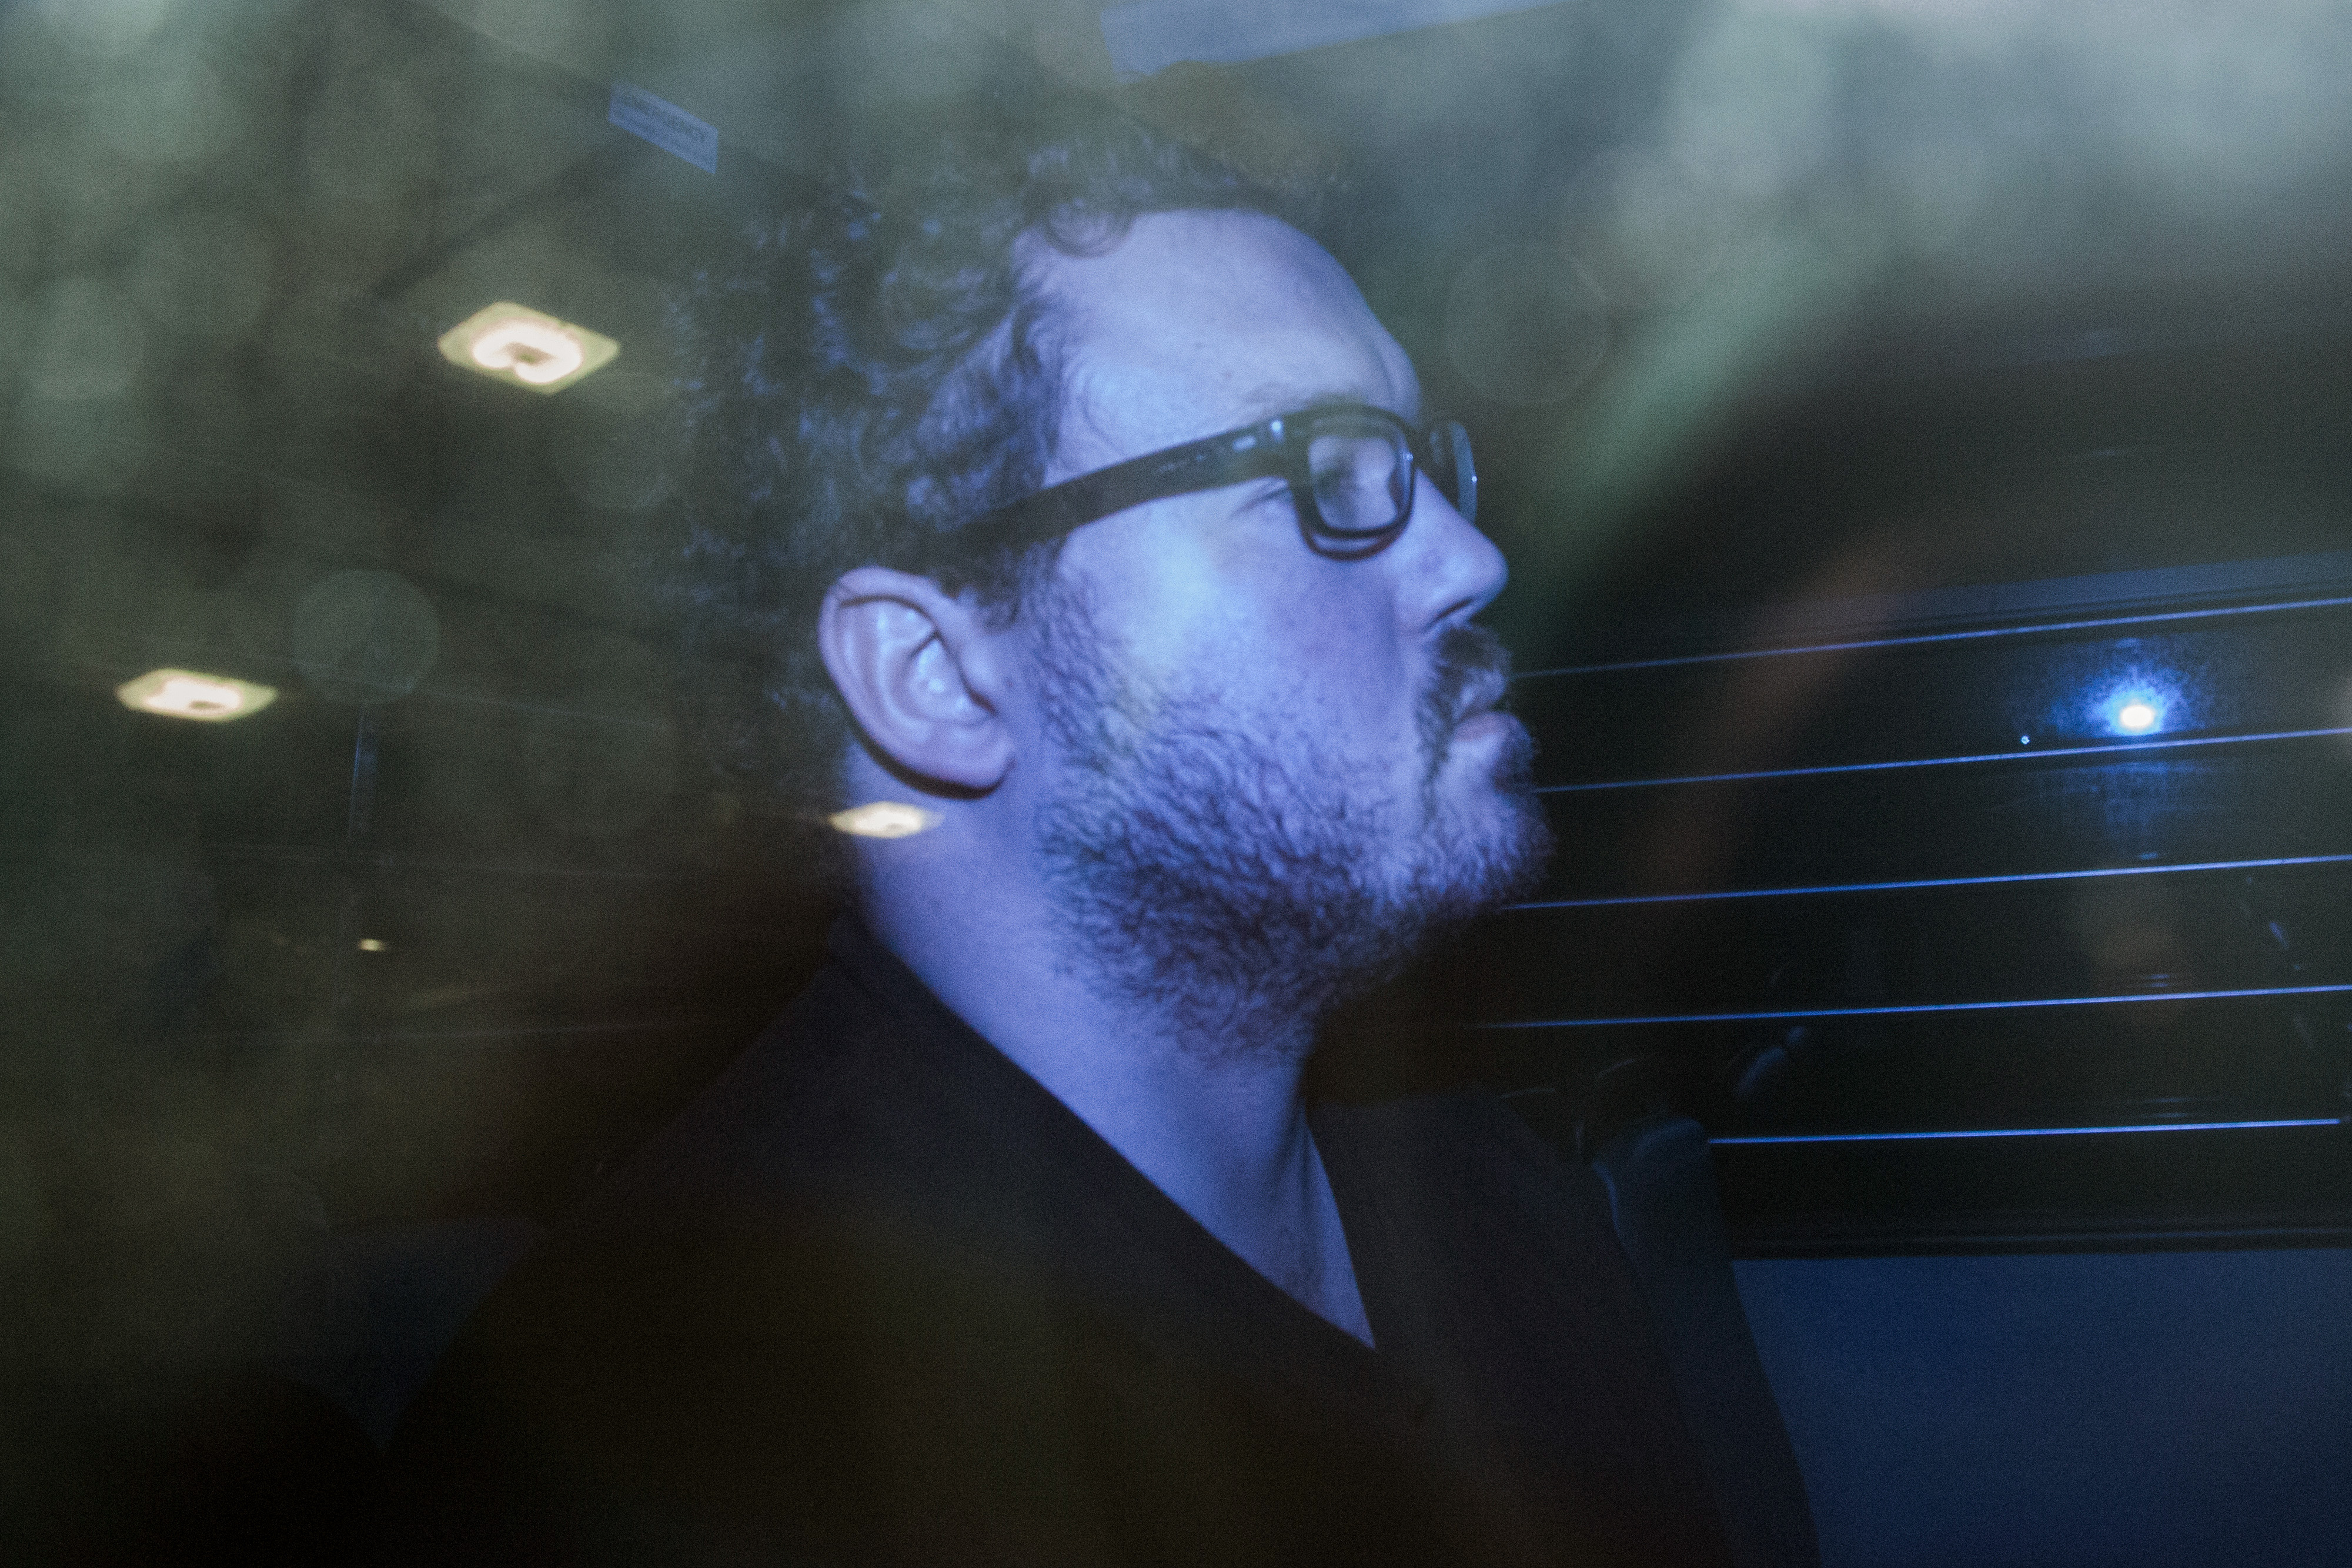 British Banker Jutting Charged With Killing Two Women in Hong Kong